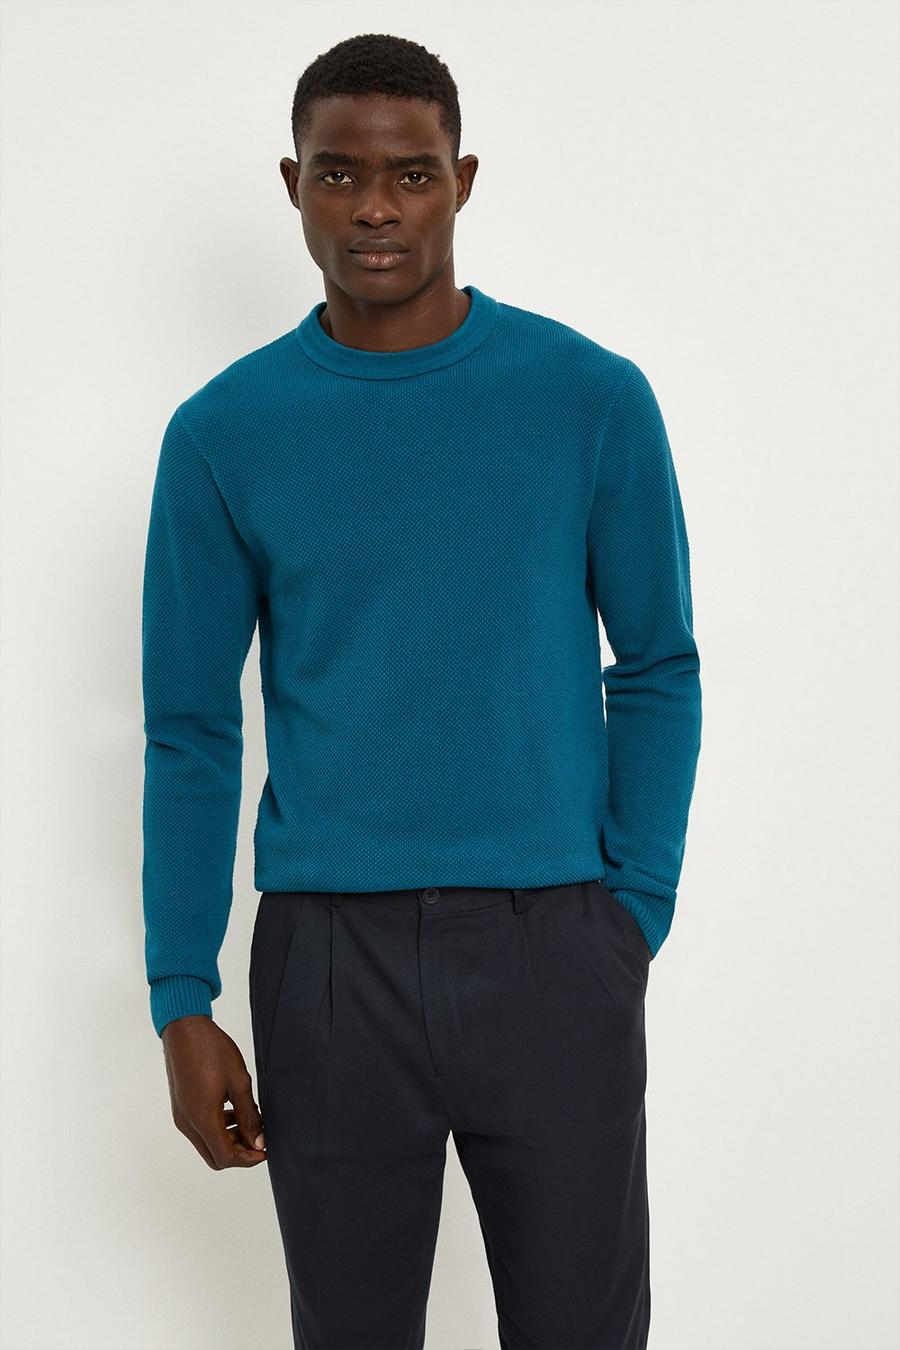 Slim Fit Long Sleeve Mossy Stitch Teal Crew Neck Jumper